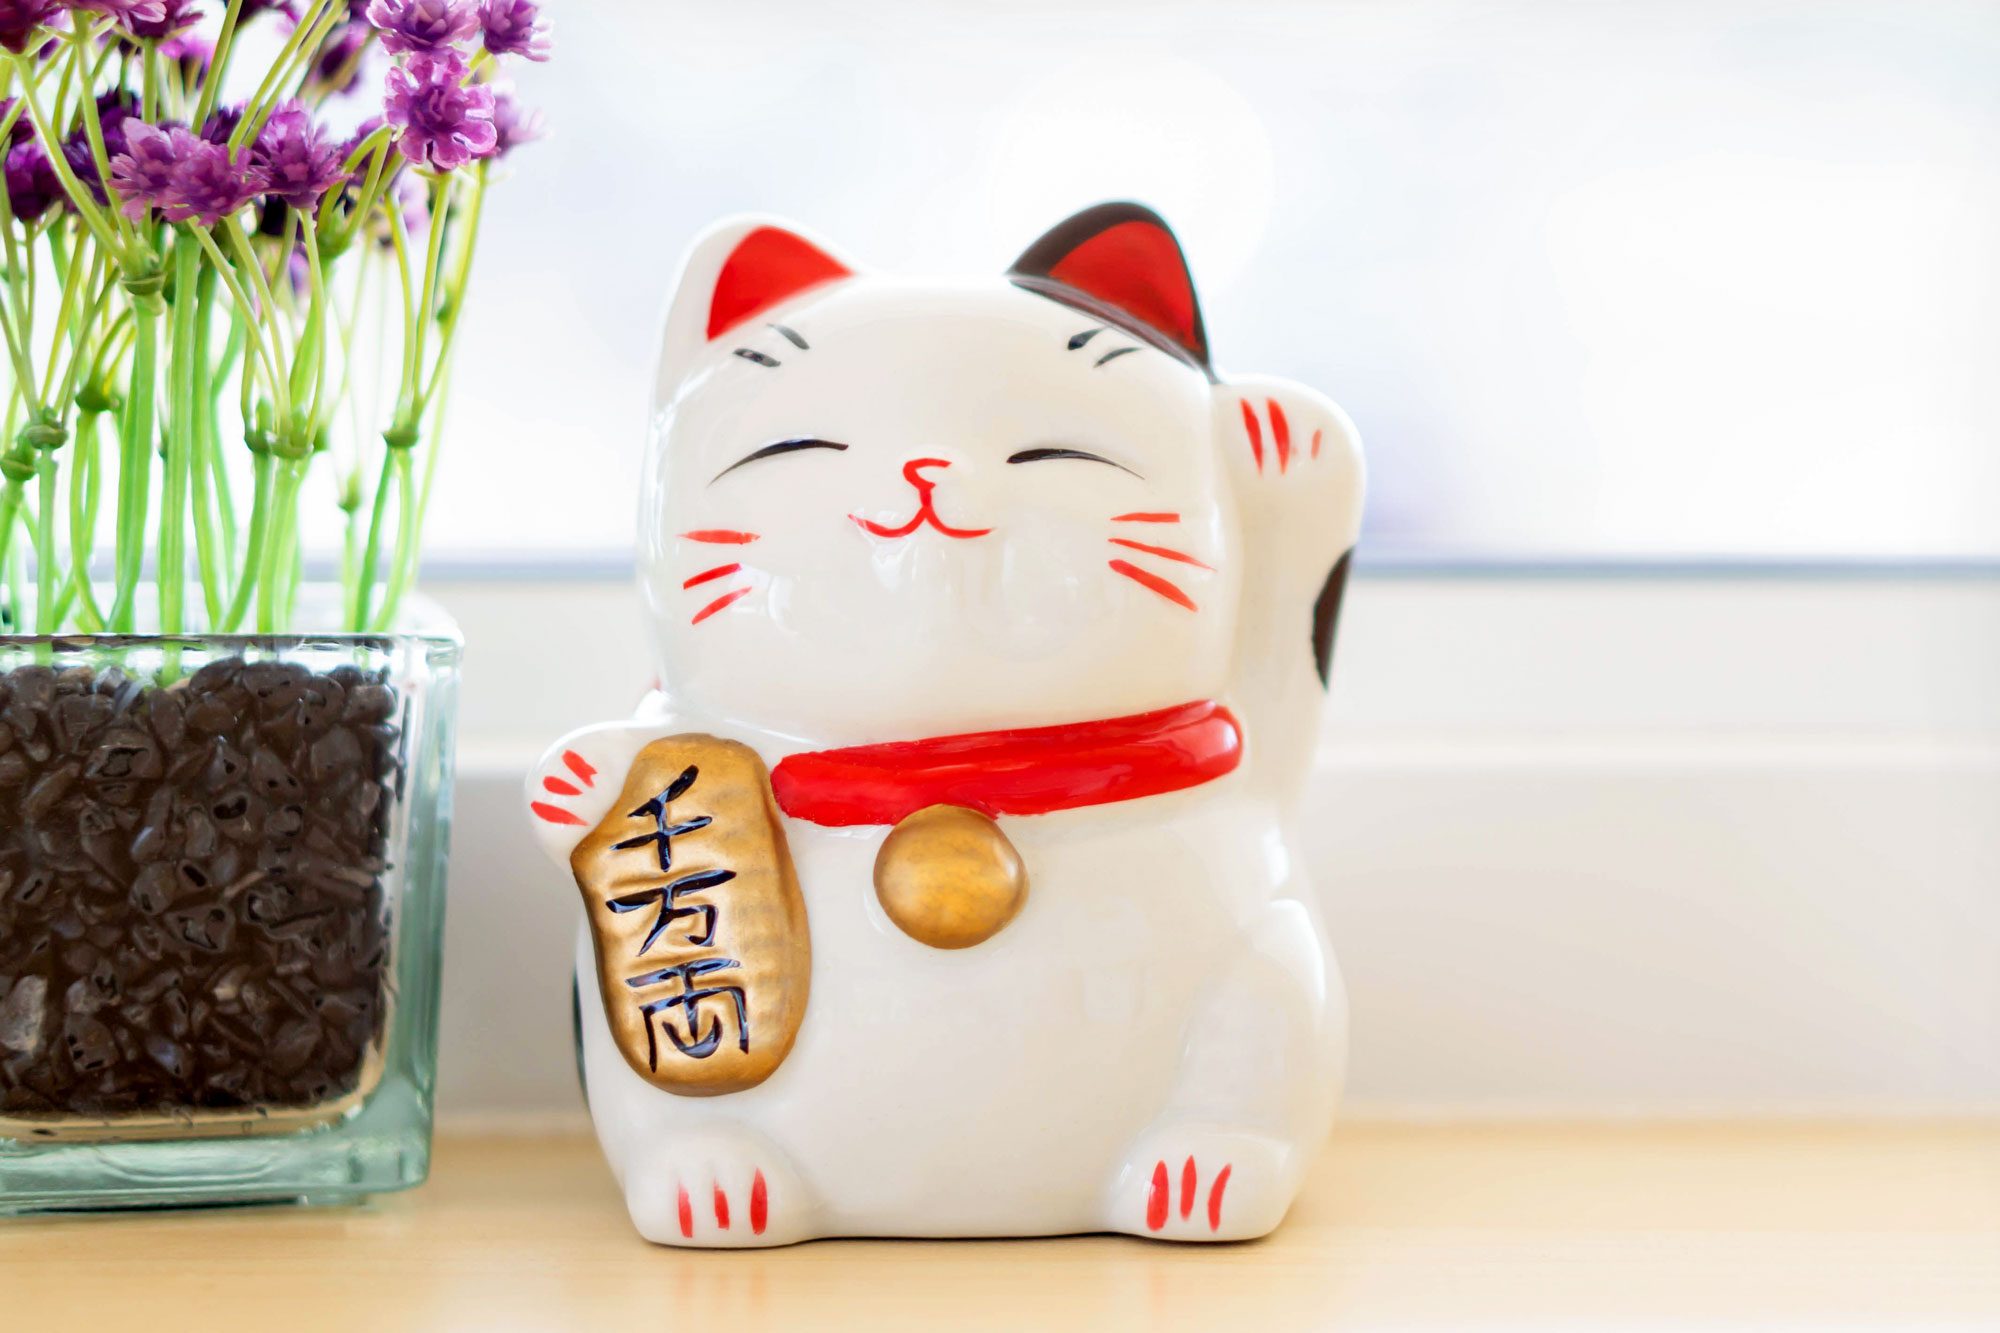 Maneki Neko Lucky Cat Show Text On Hand Meaning Rich On Table, Select Focus